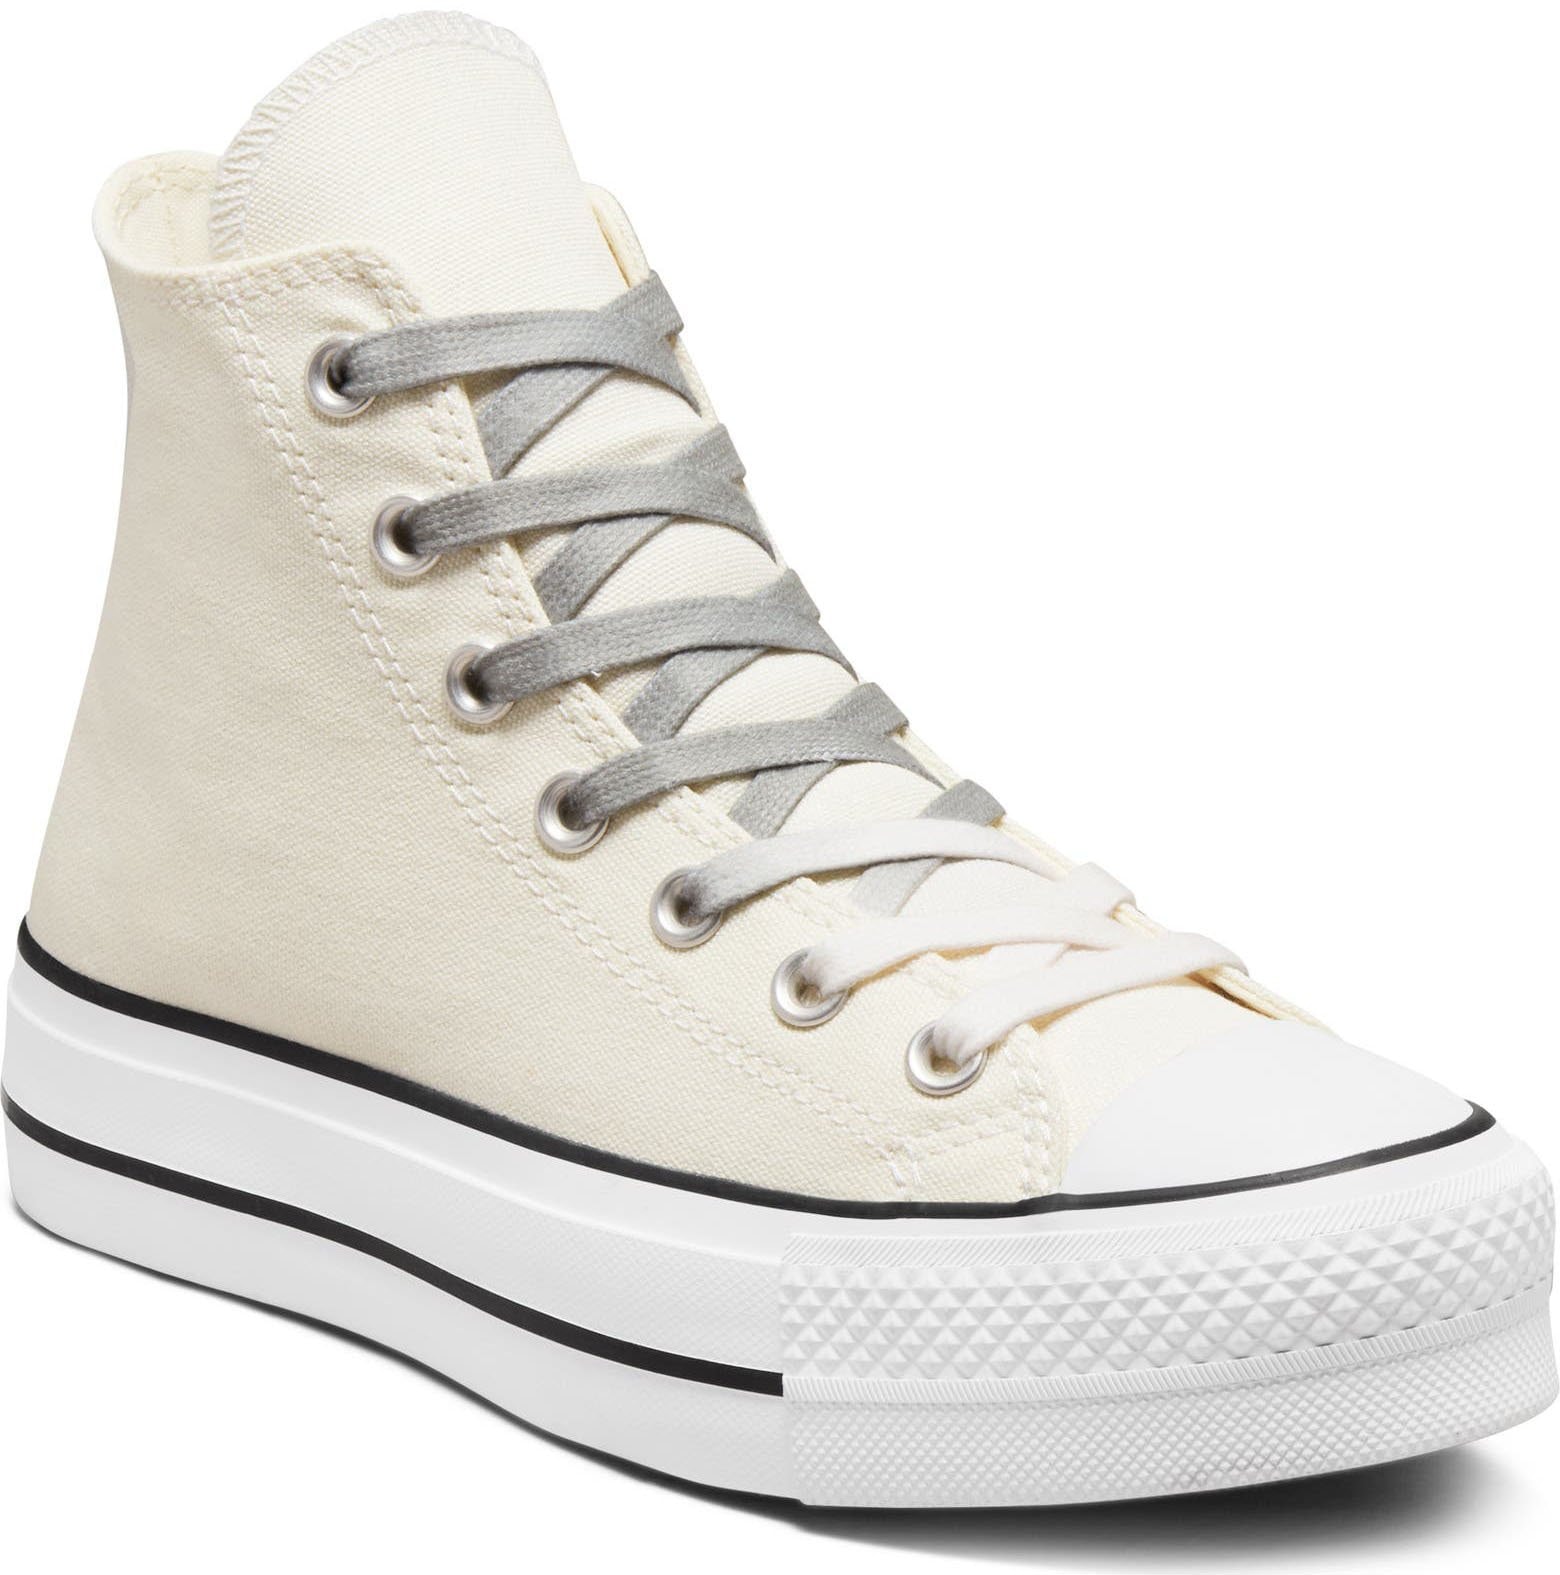 These Converse kicks are defined by the high-top silhouette and platform rubber soles